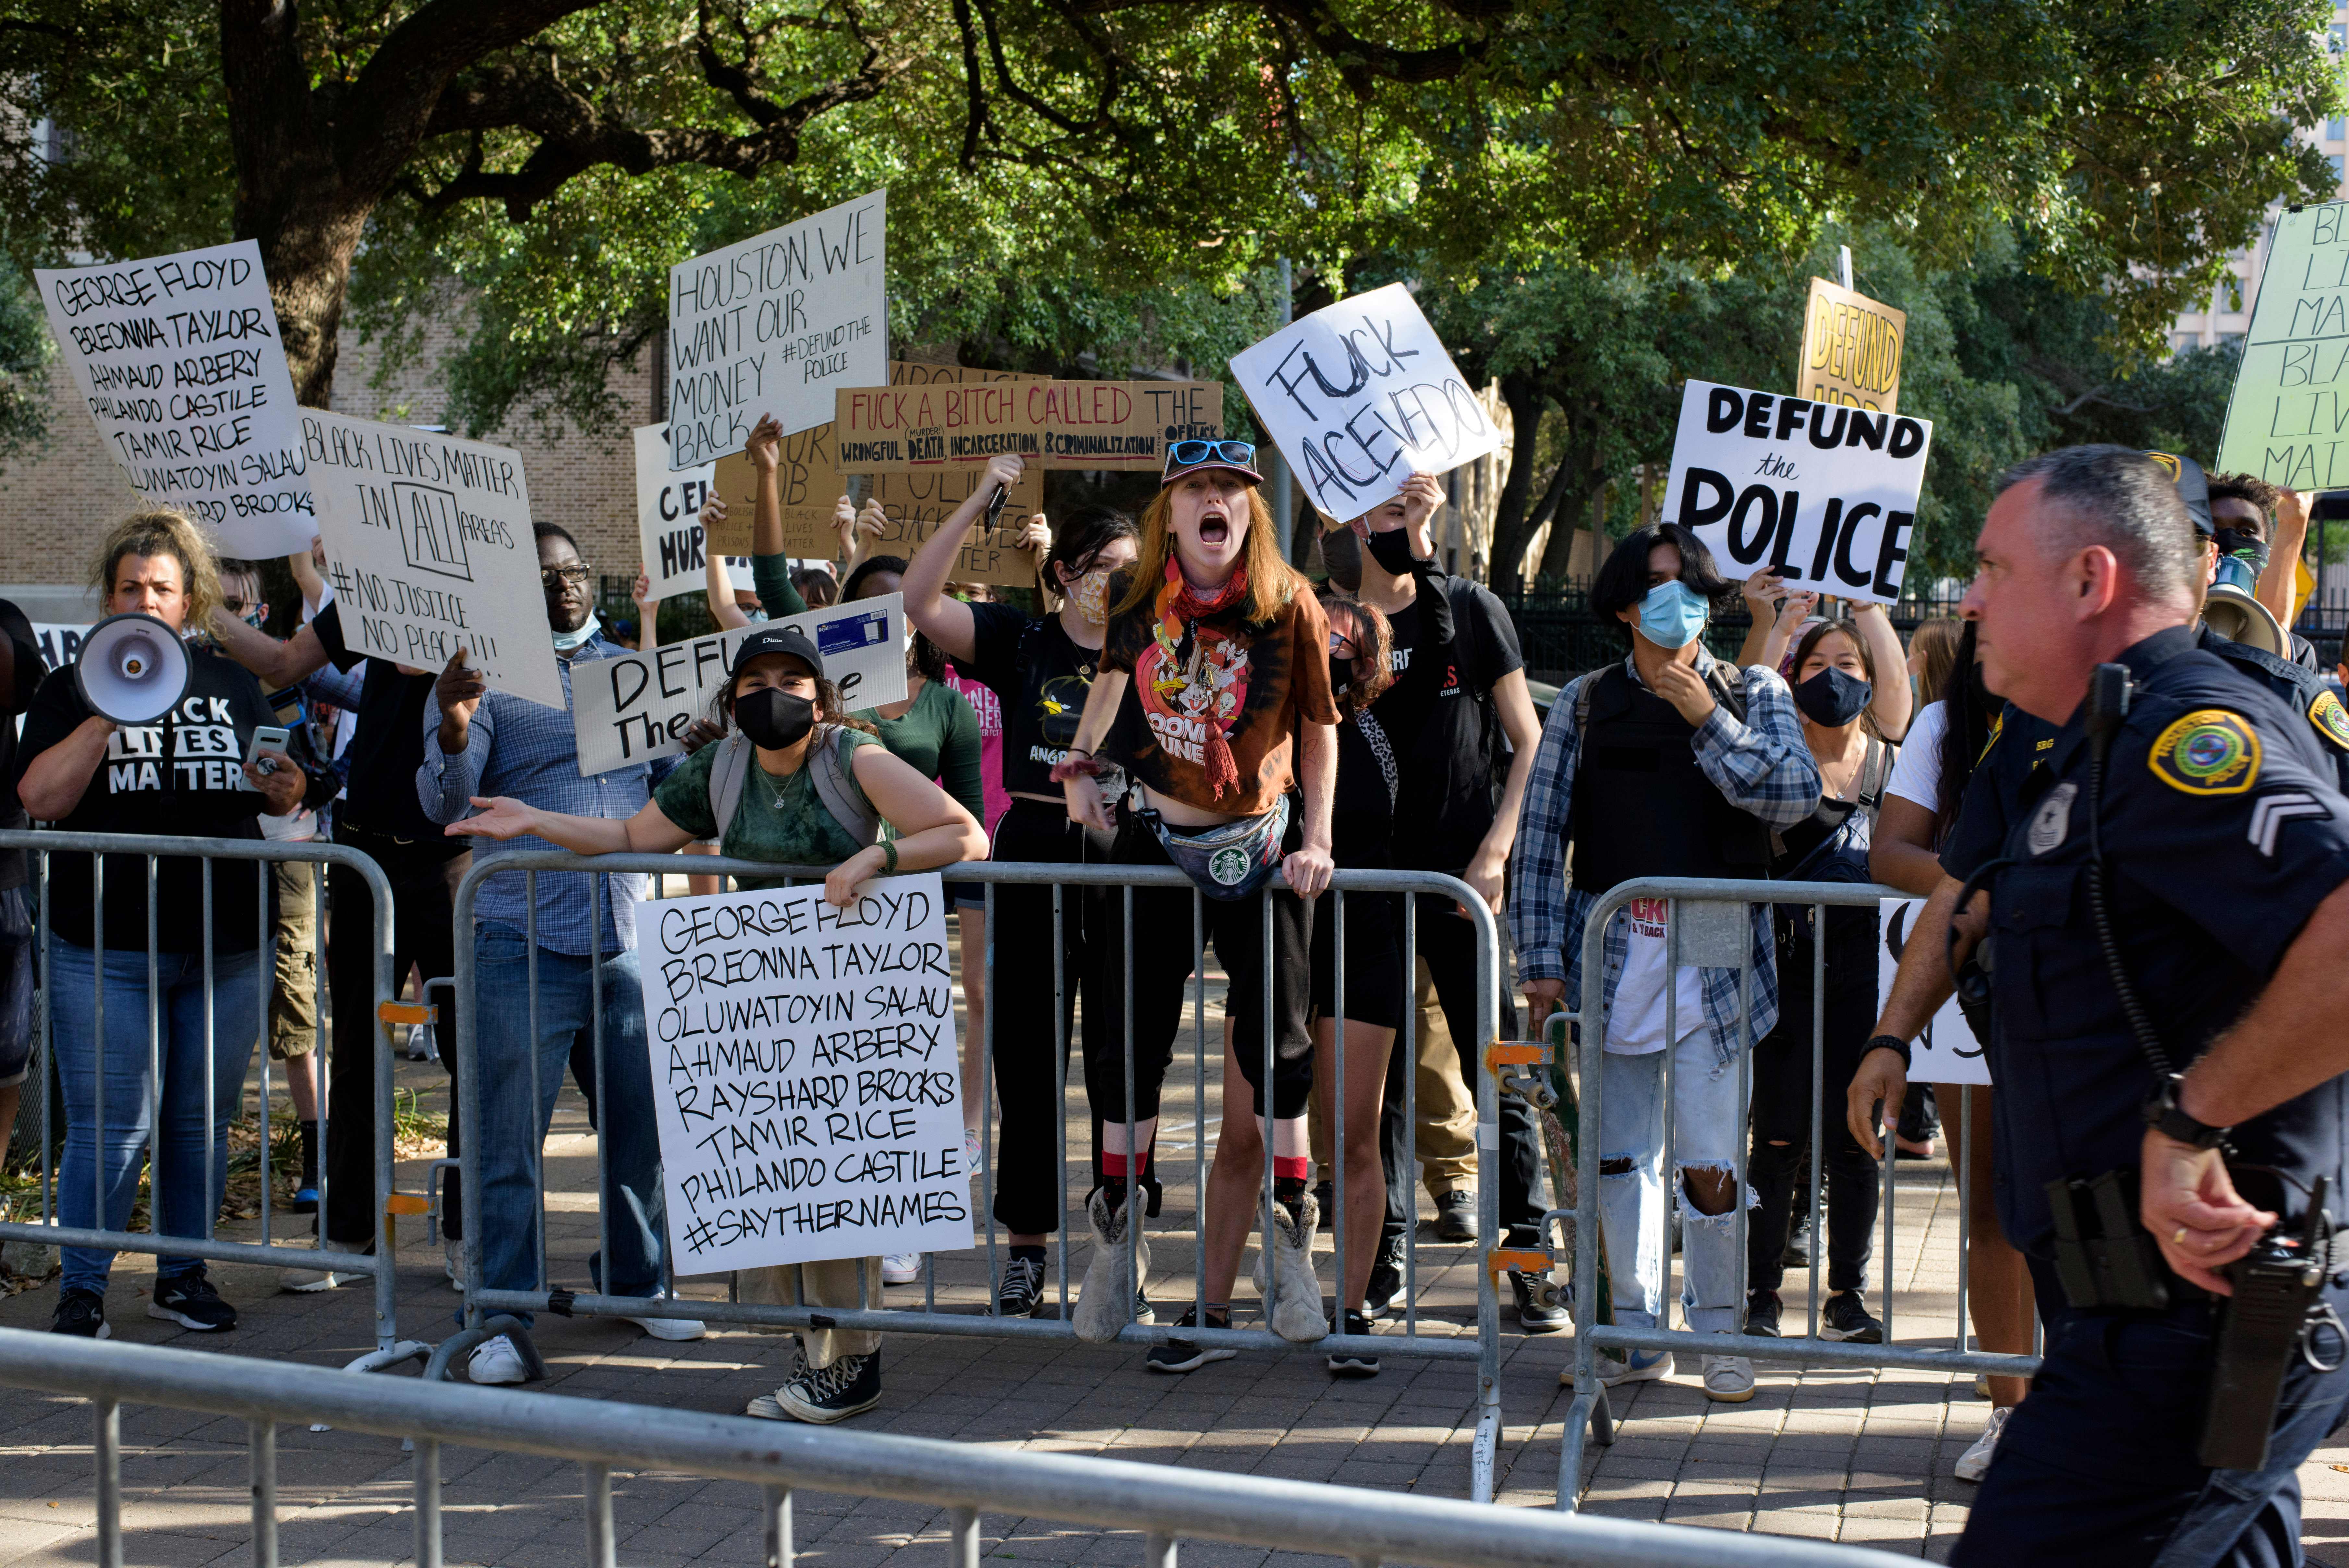 Counter-protesters hold placards and shout during a Police Appreciation rally at the City Hall in Houston, Texas on June 18, 2020. (Photo by Mark Felix / AFP) (Photo by MARK FELIX/AFP /AFP via Getty Images)